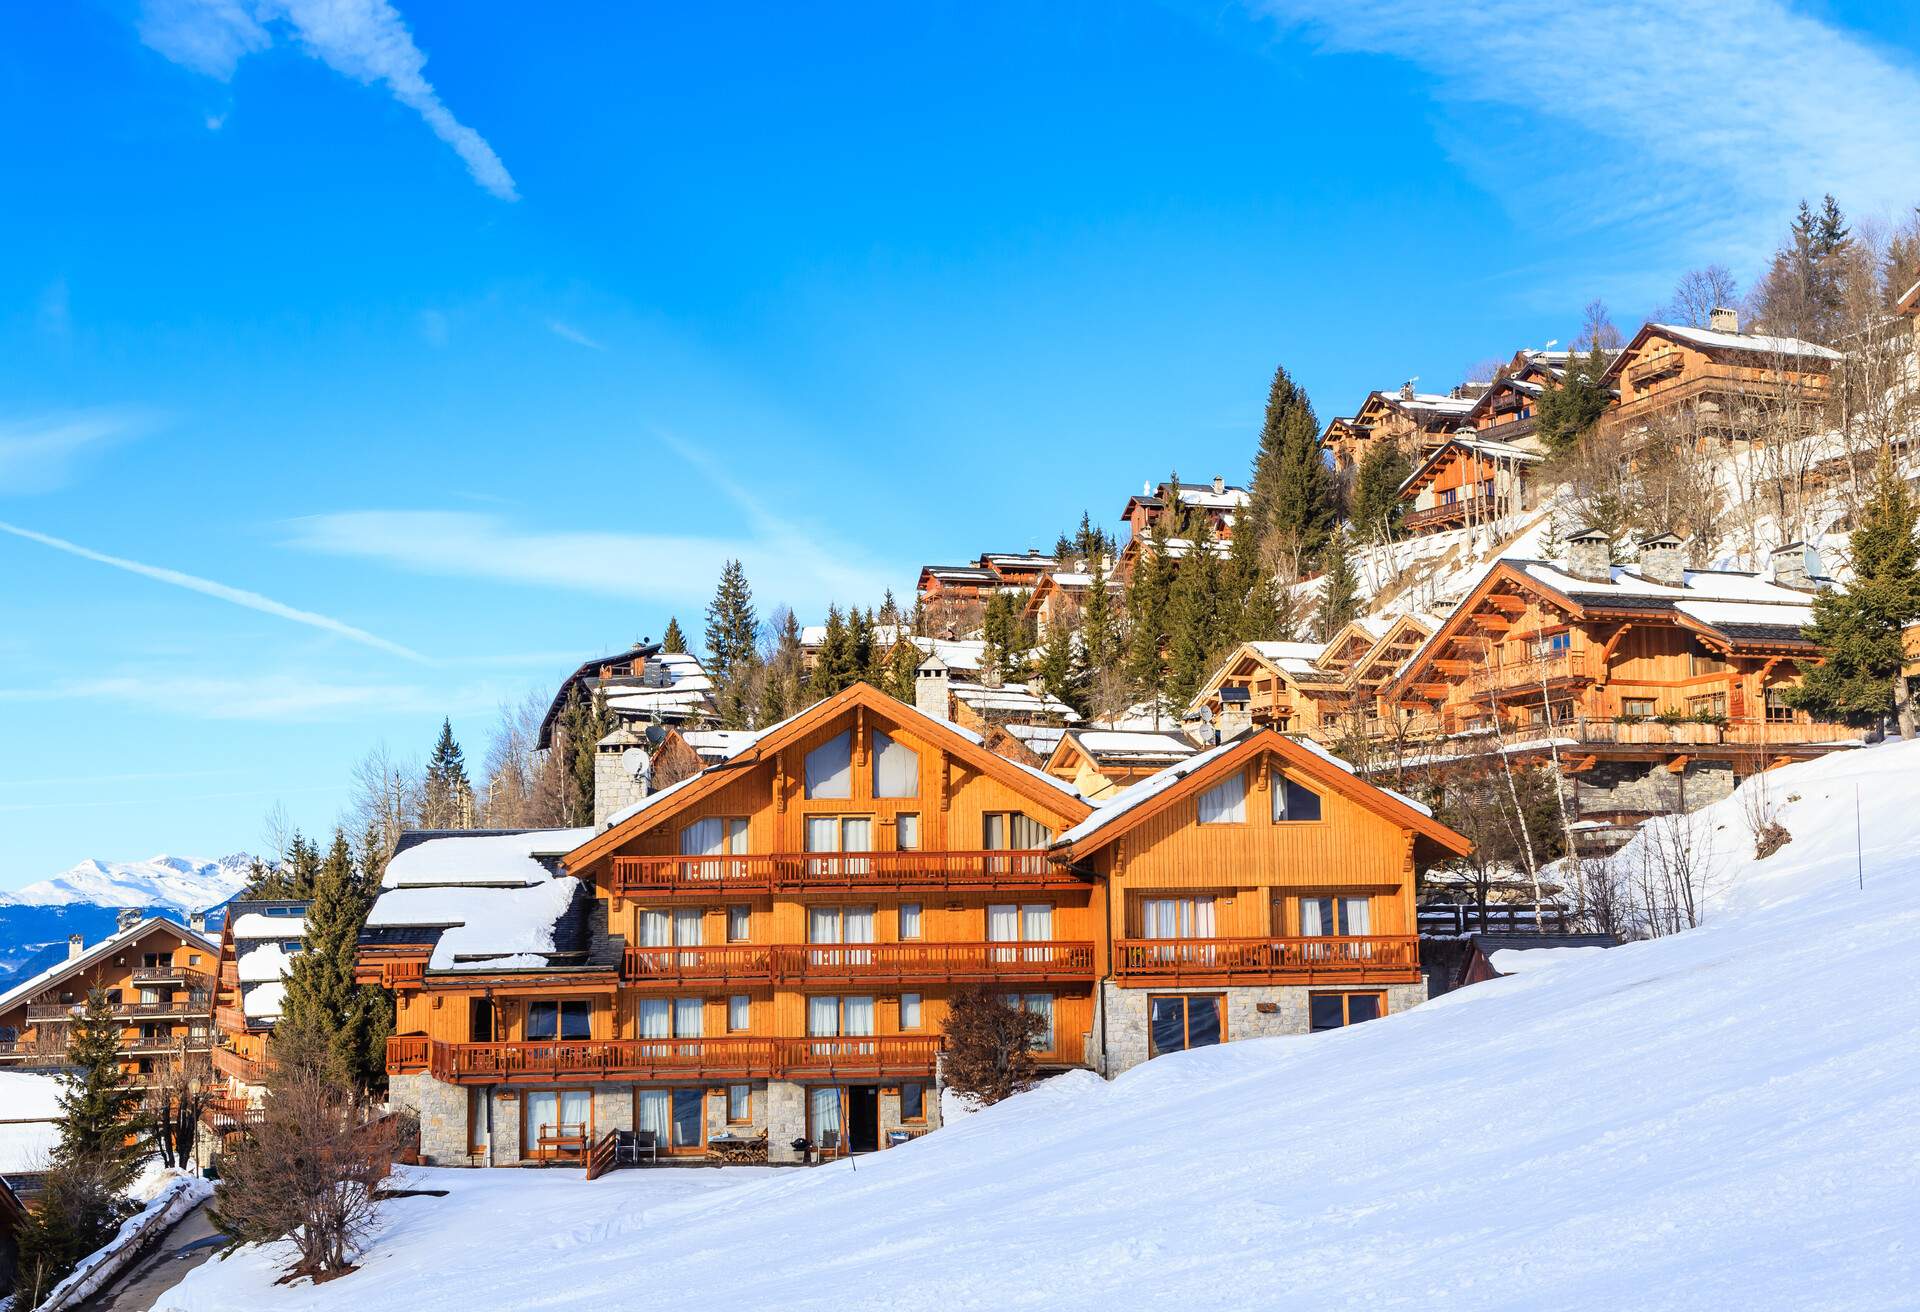 Wooden chalets along the slope side of a snow-covered mountain dotted with trees.